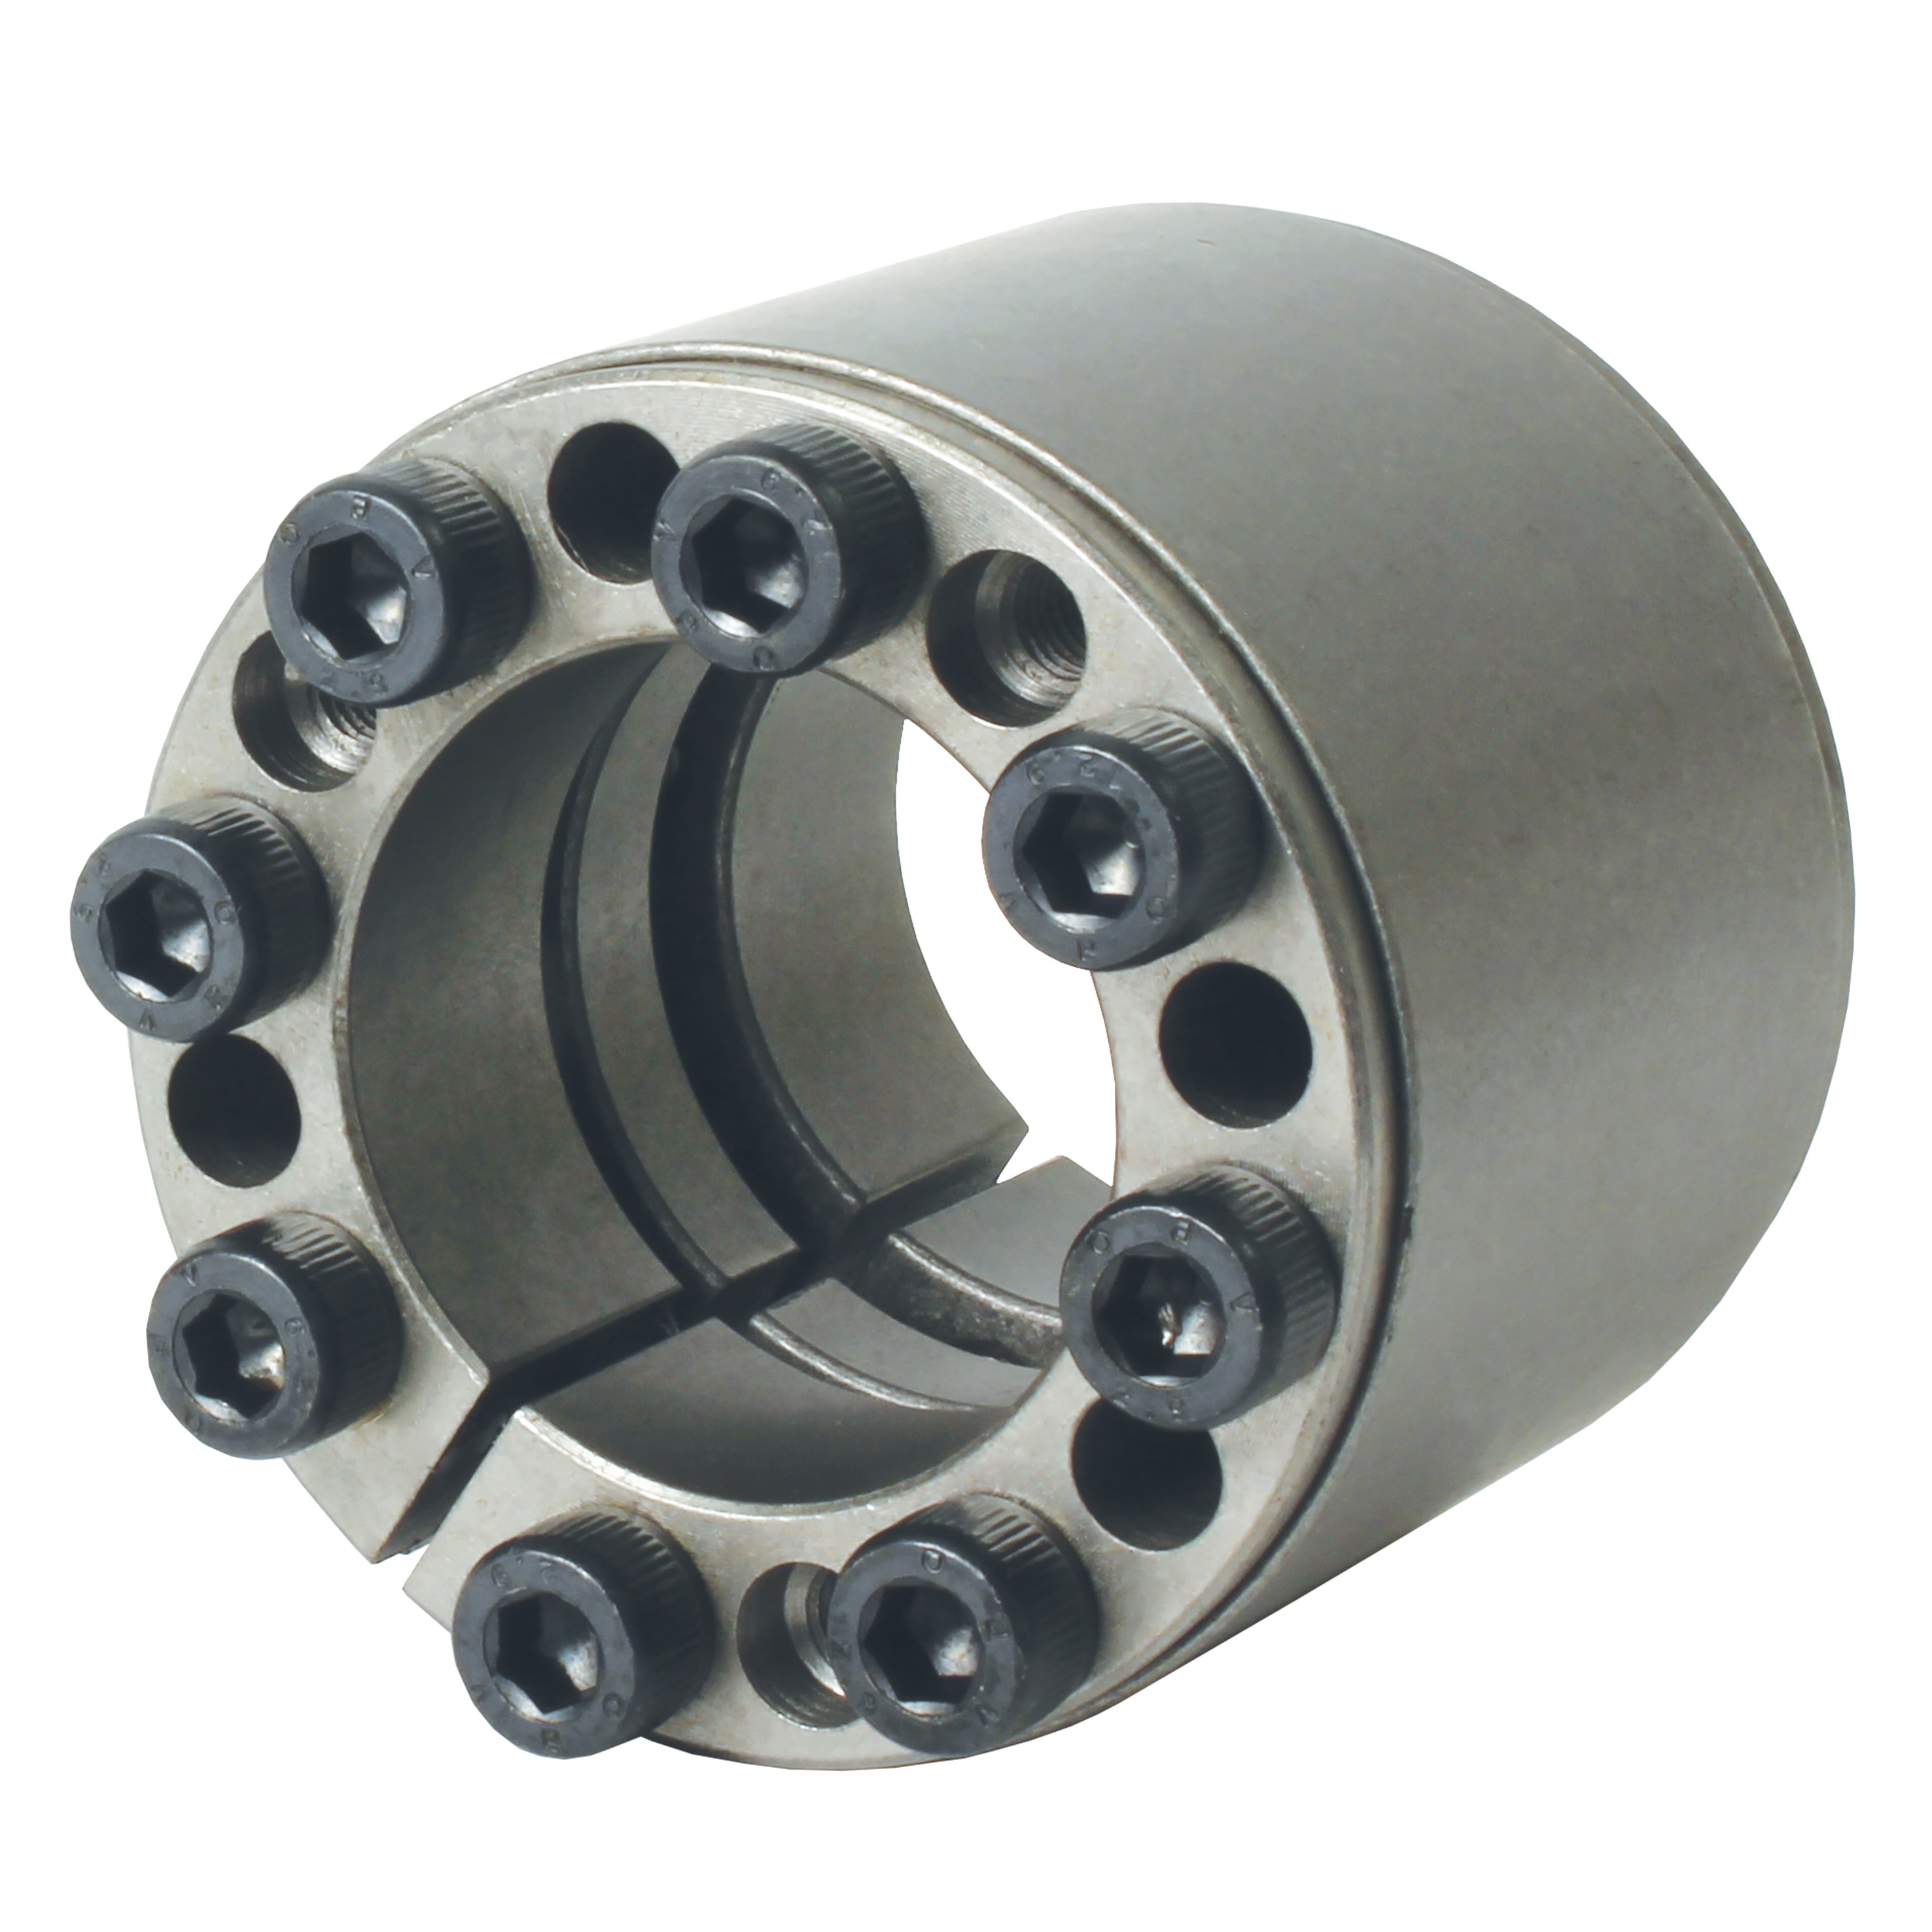 Self-centering locking assembly - High torque - Yes - Complete